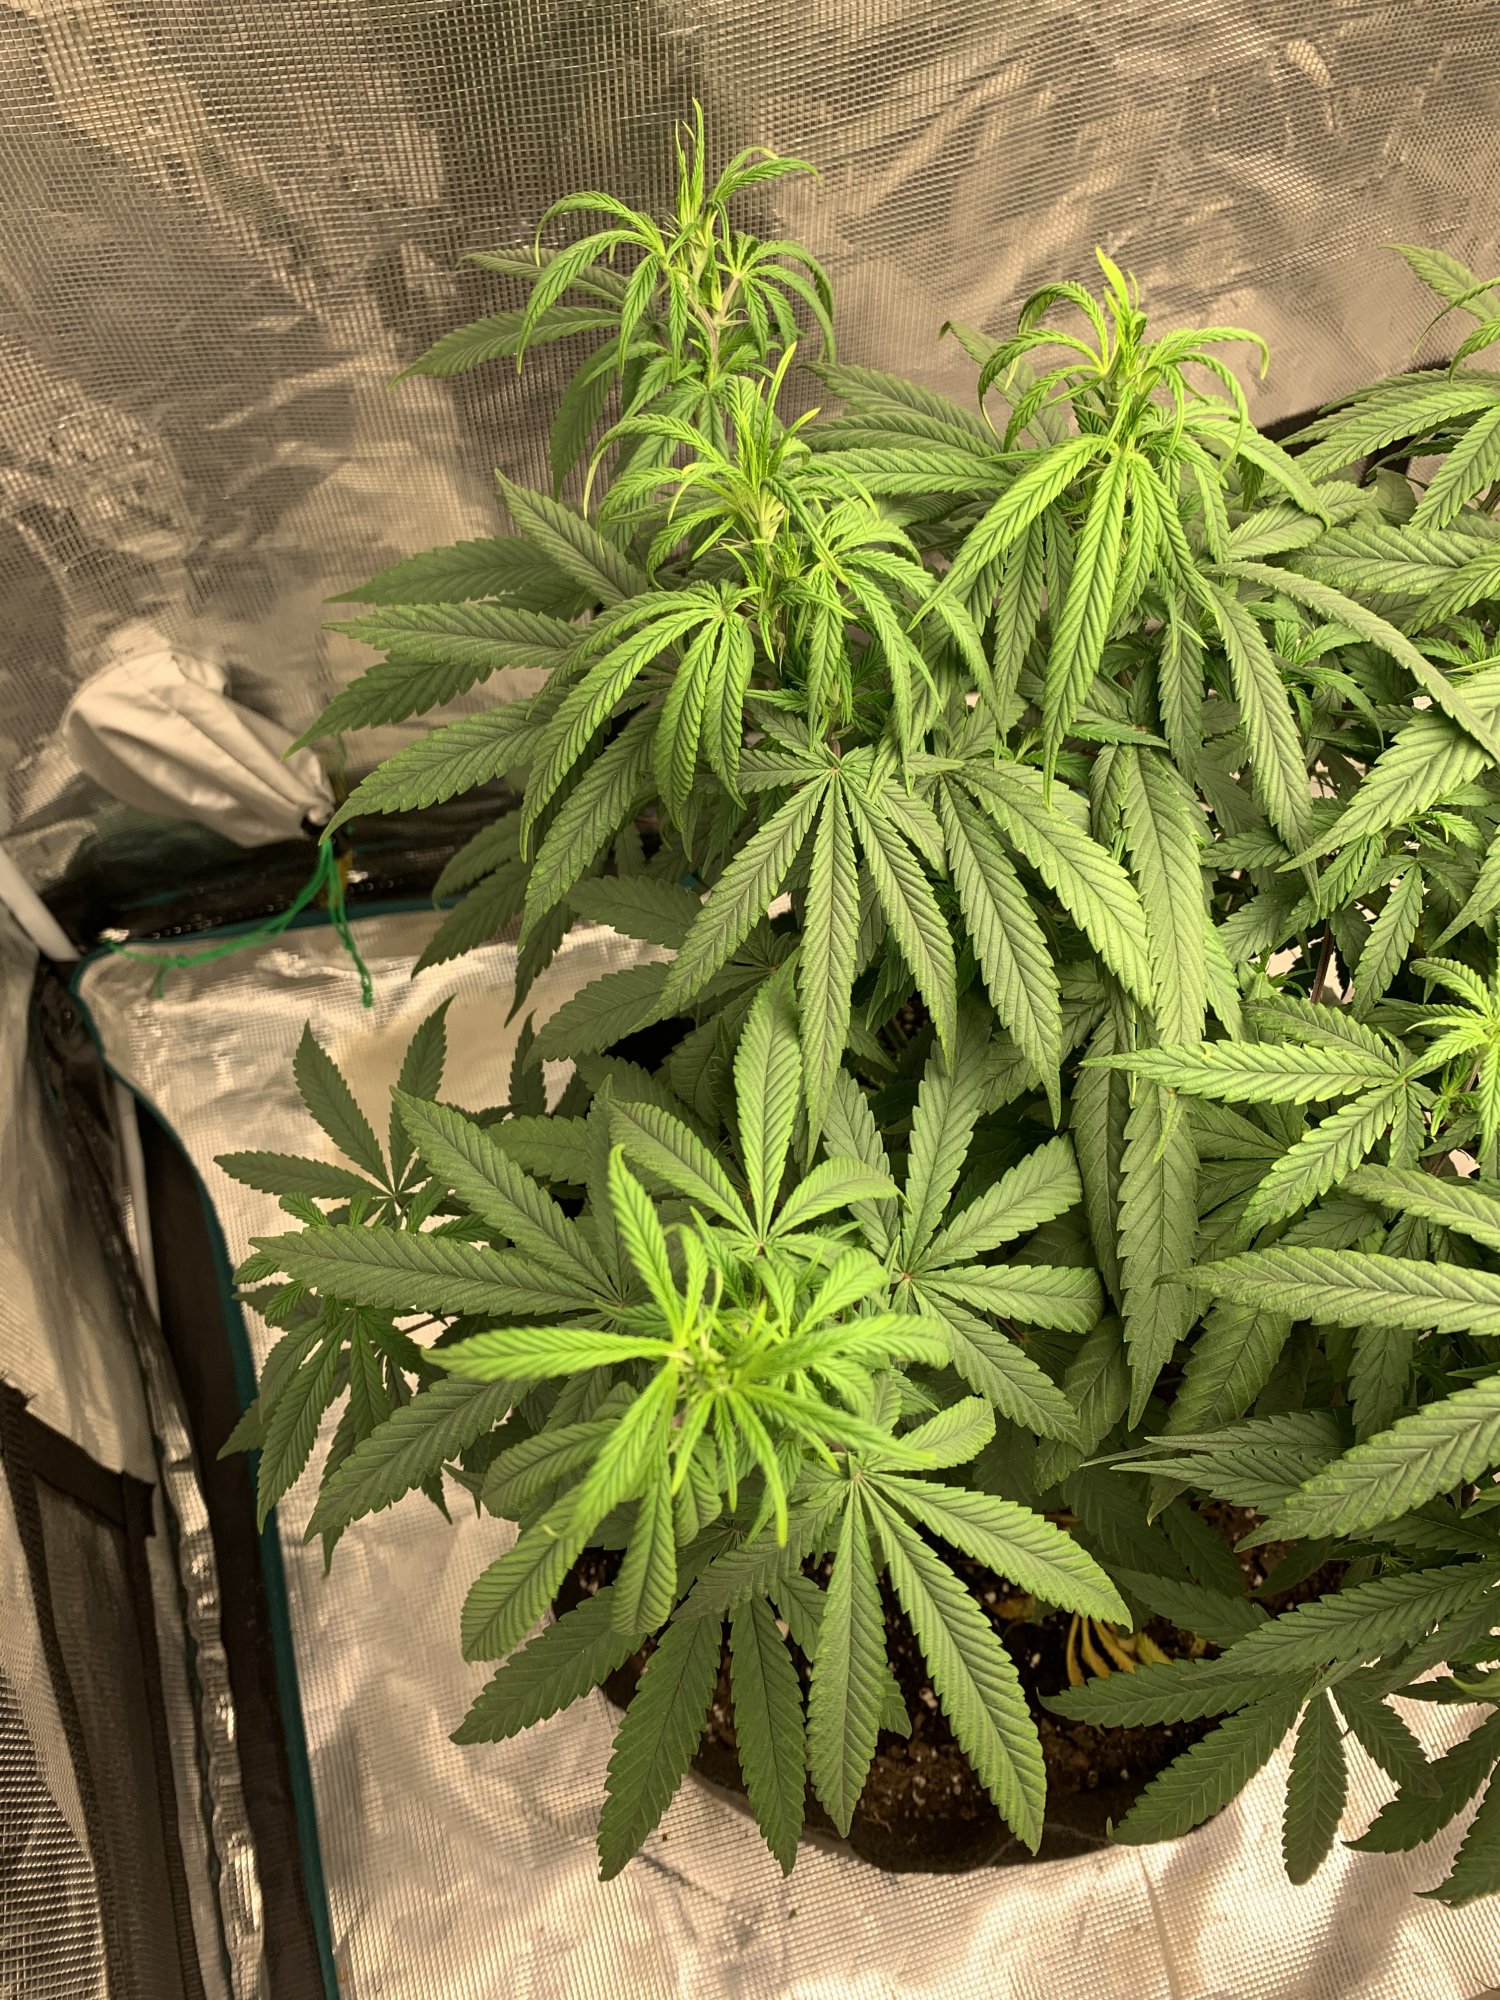 Star cookies continue to show deficiencies dont want to burn help 4